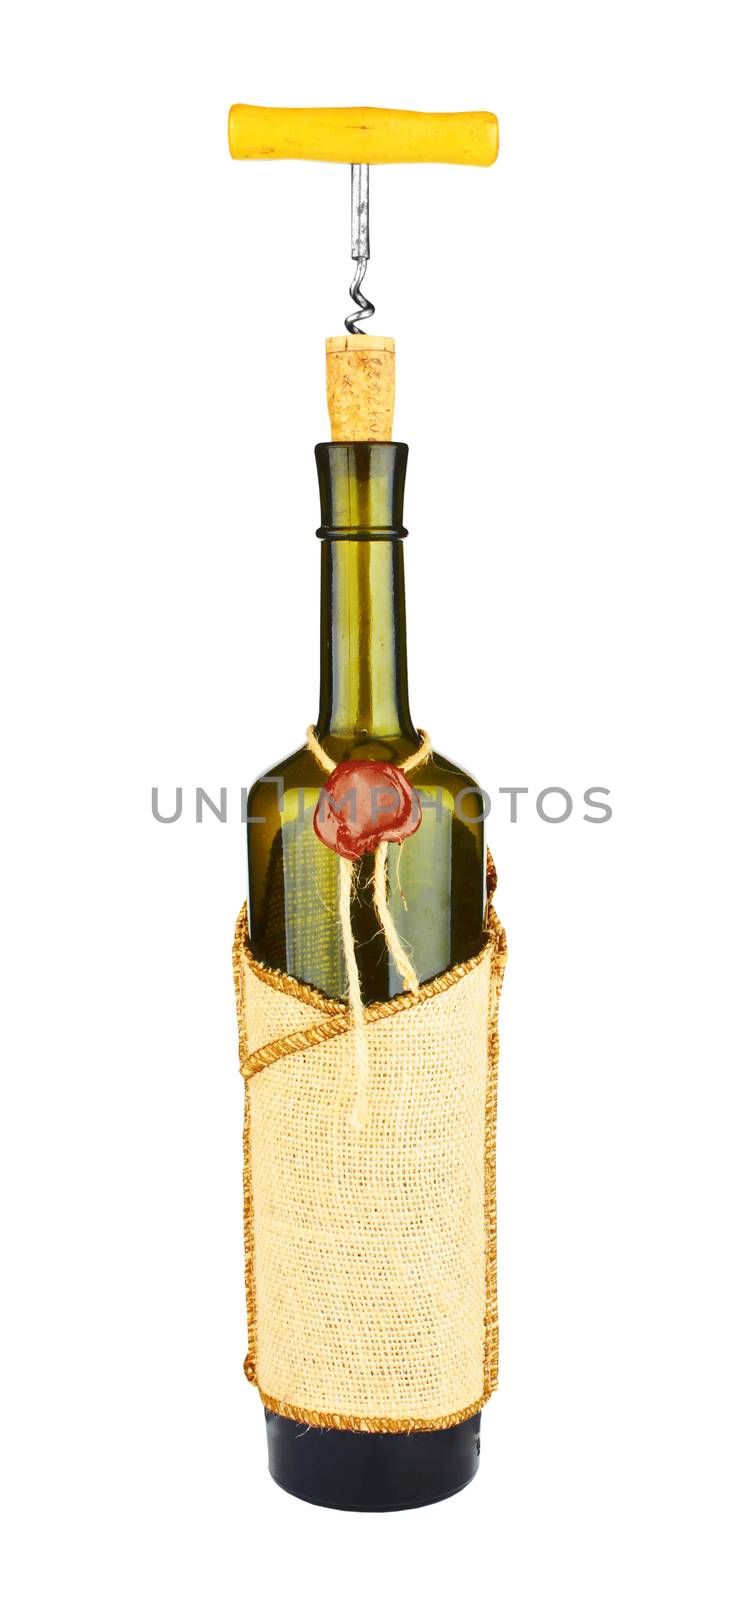 Corkscrew on a wine bottle. Isolated on white